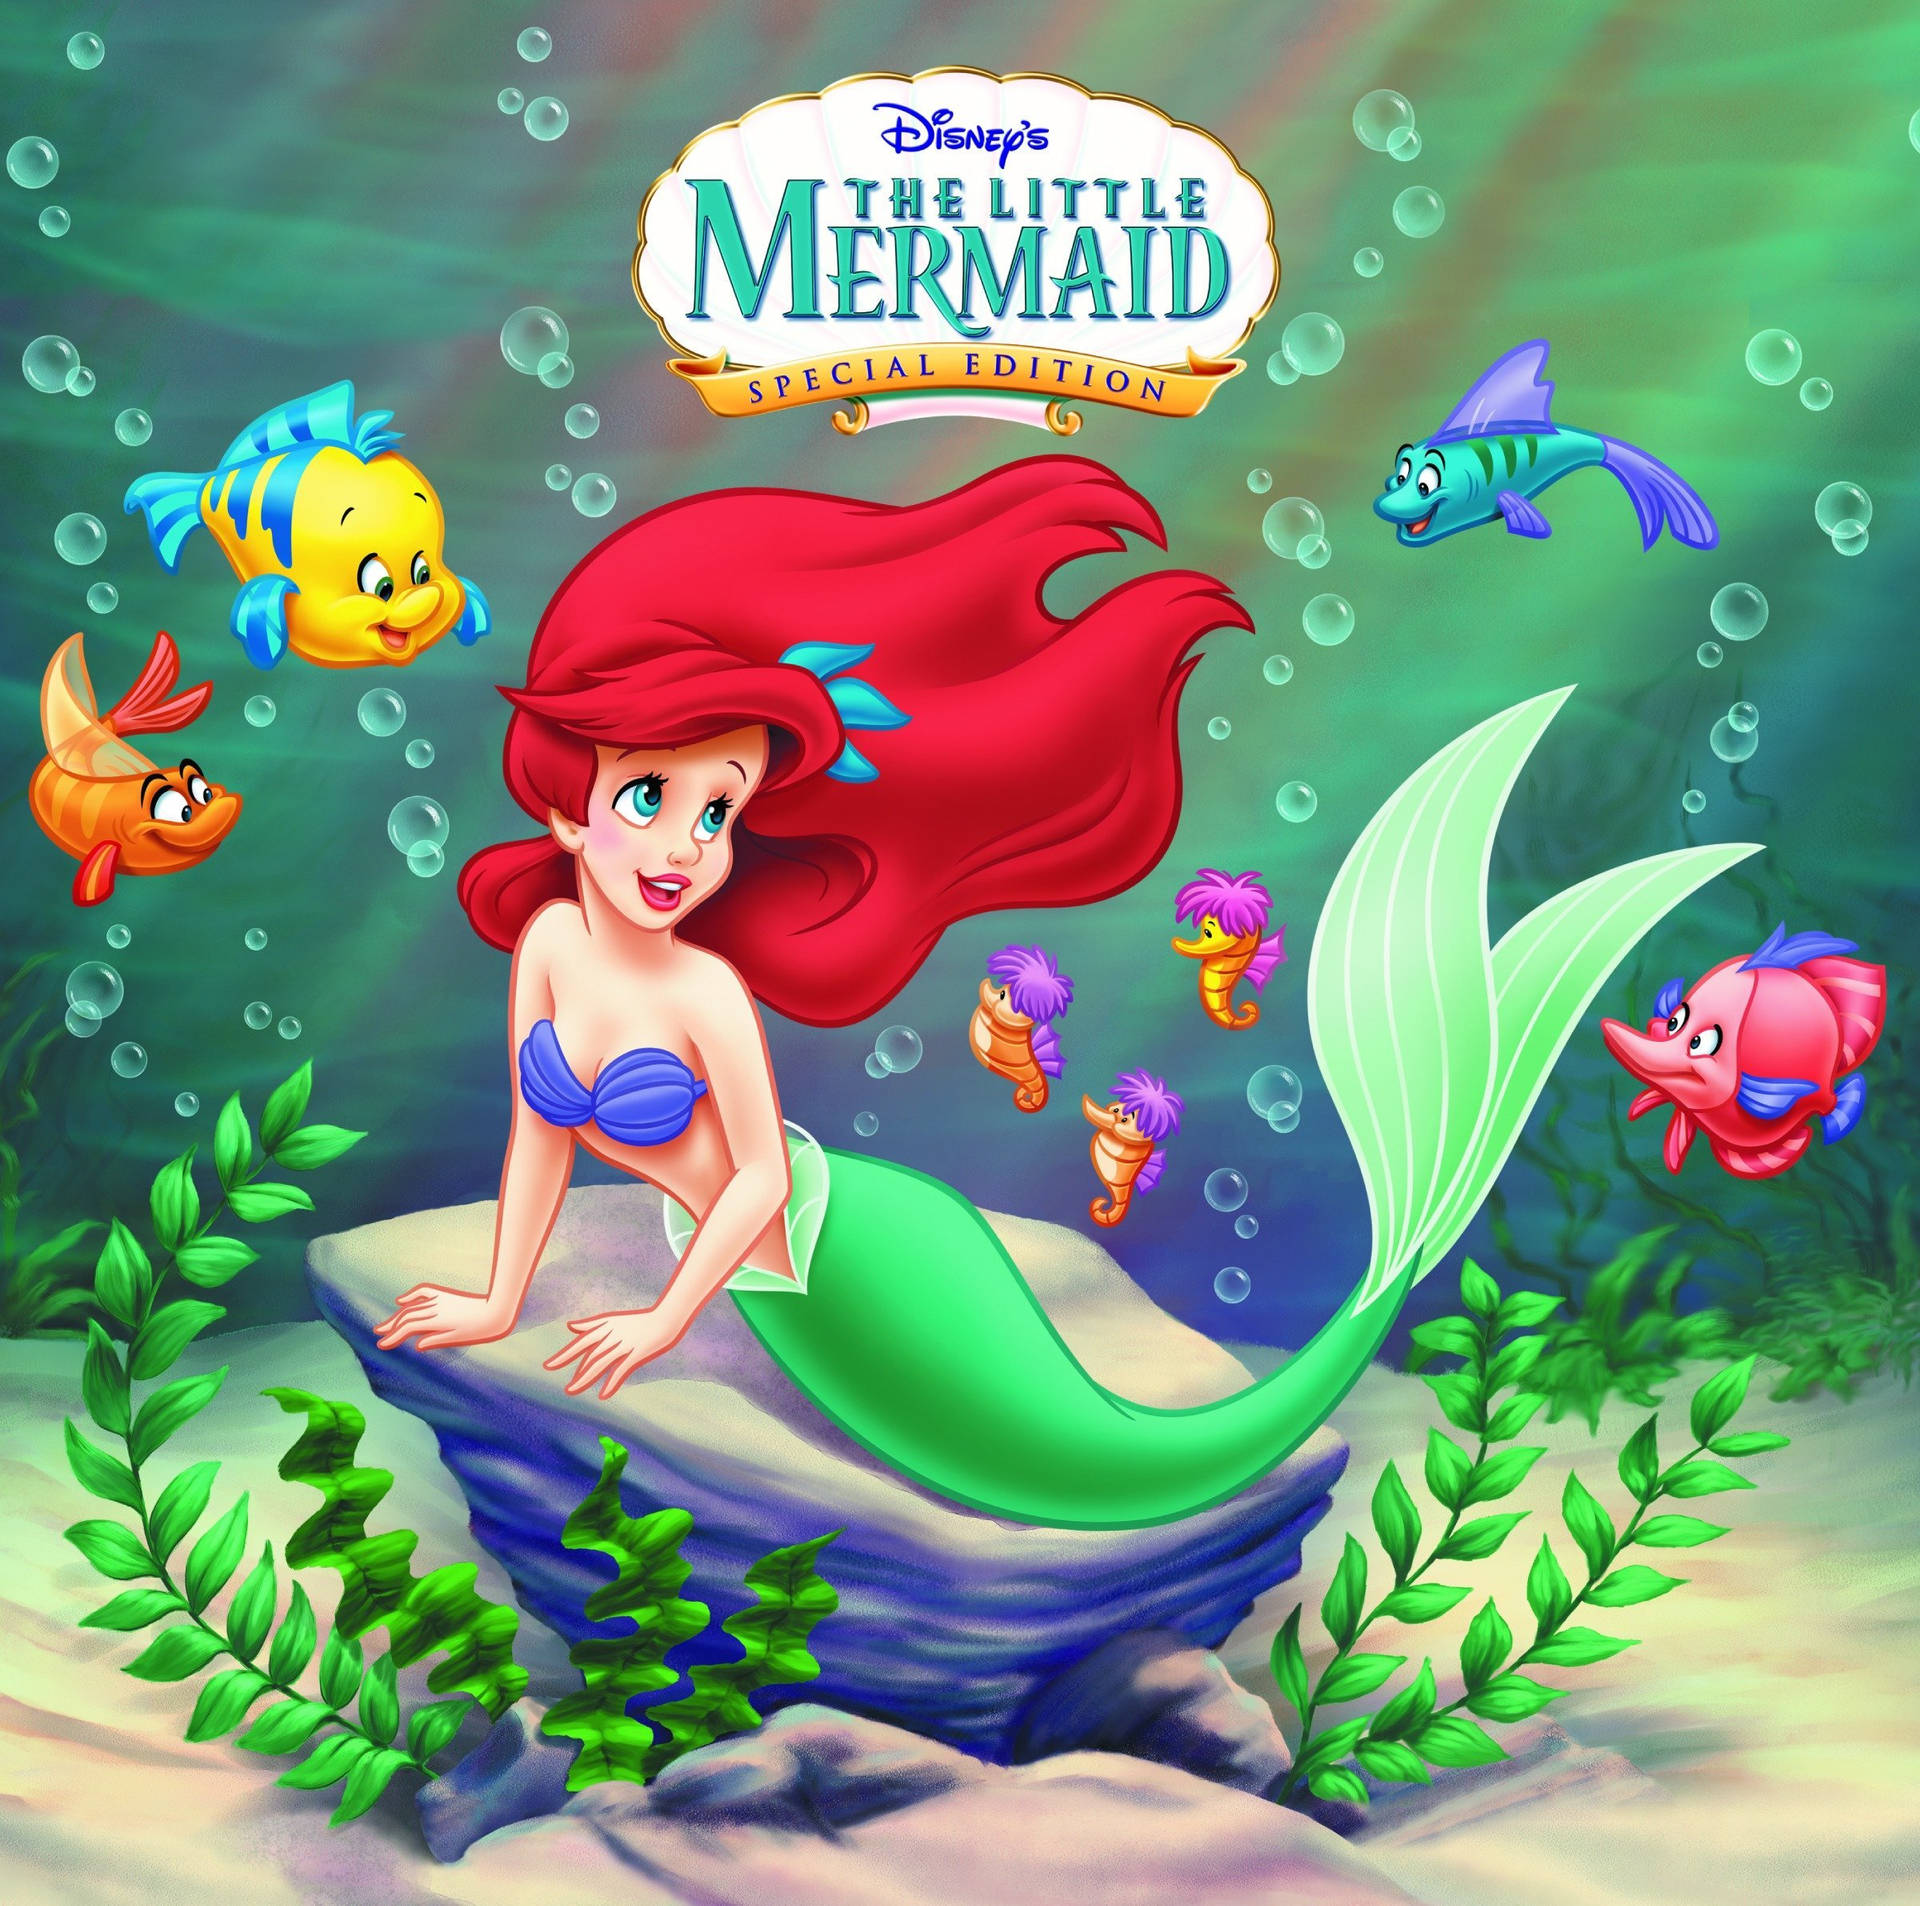 The Little Mermaid Special Edition Wallpaper